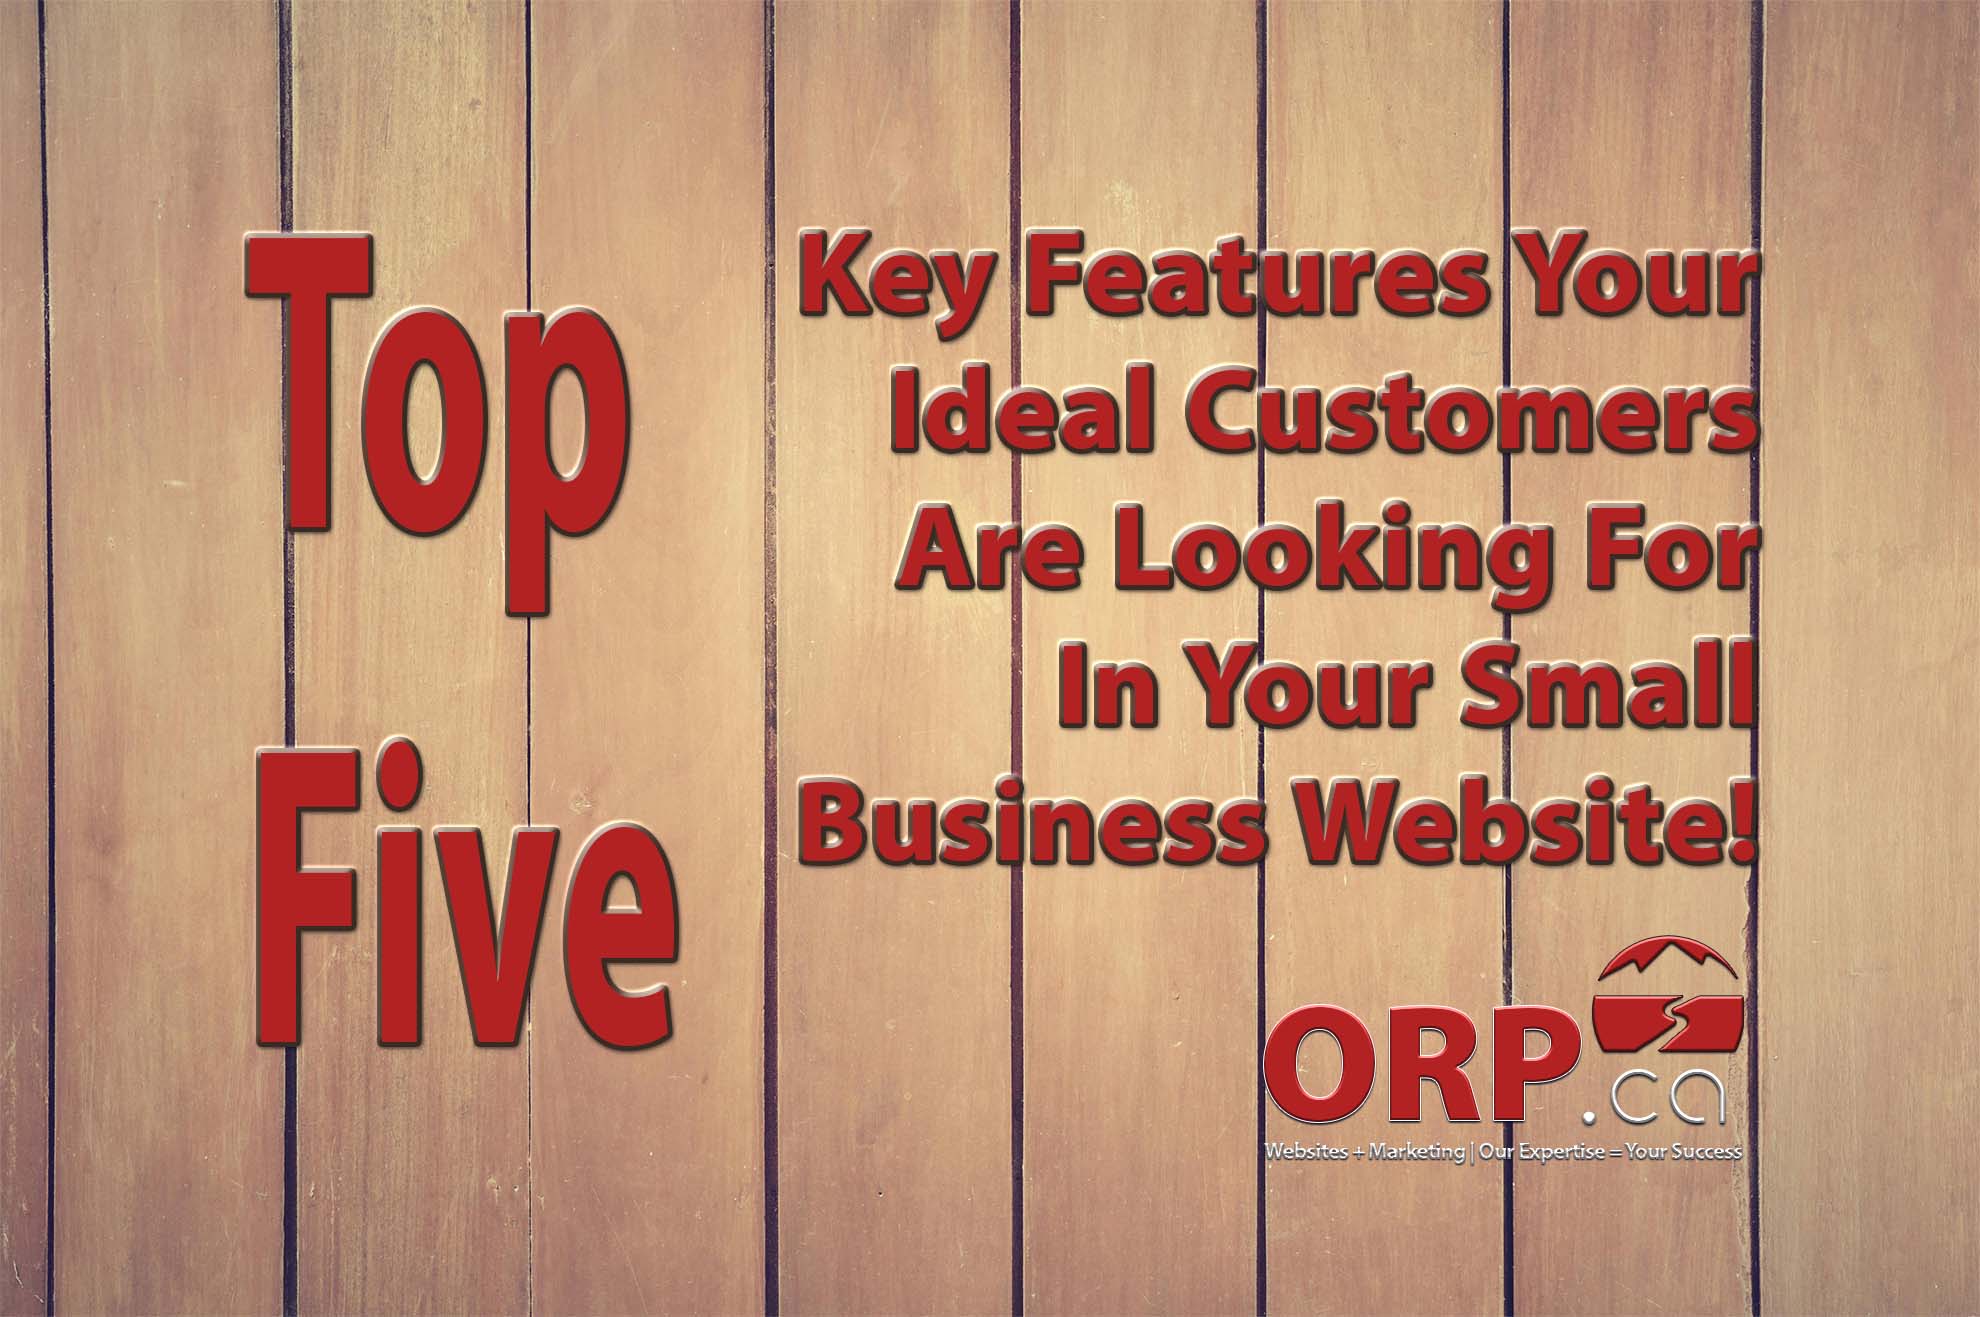 Top Five Key Features Your Ideal Customers Are Looking For In Your Small Business Website  a small business website design and development article from ORP.ca, Your Small Business Website and Digital Marketing Services Provider